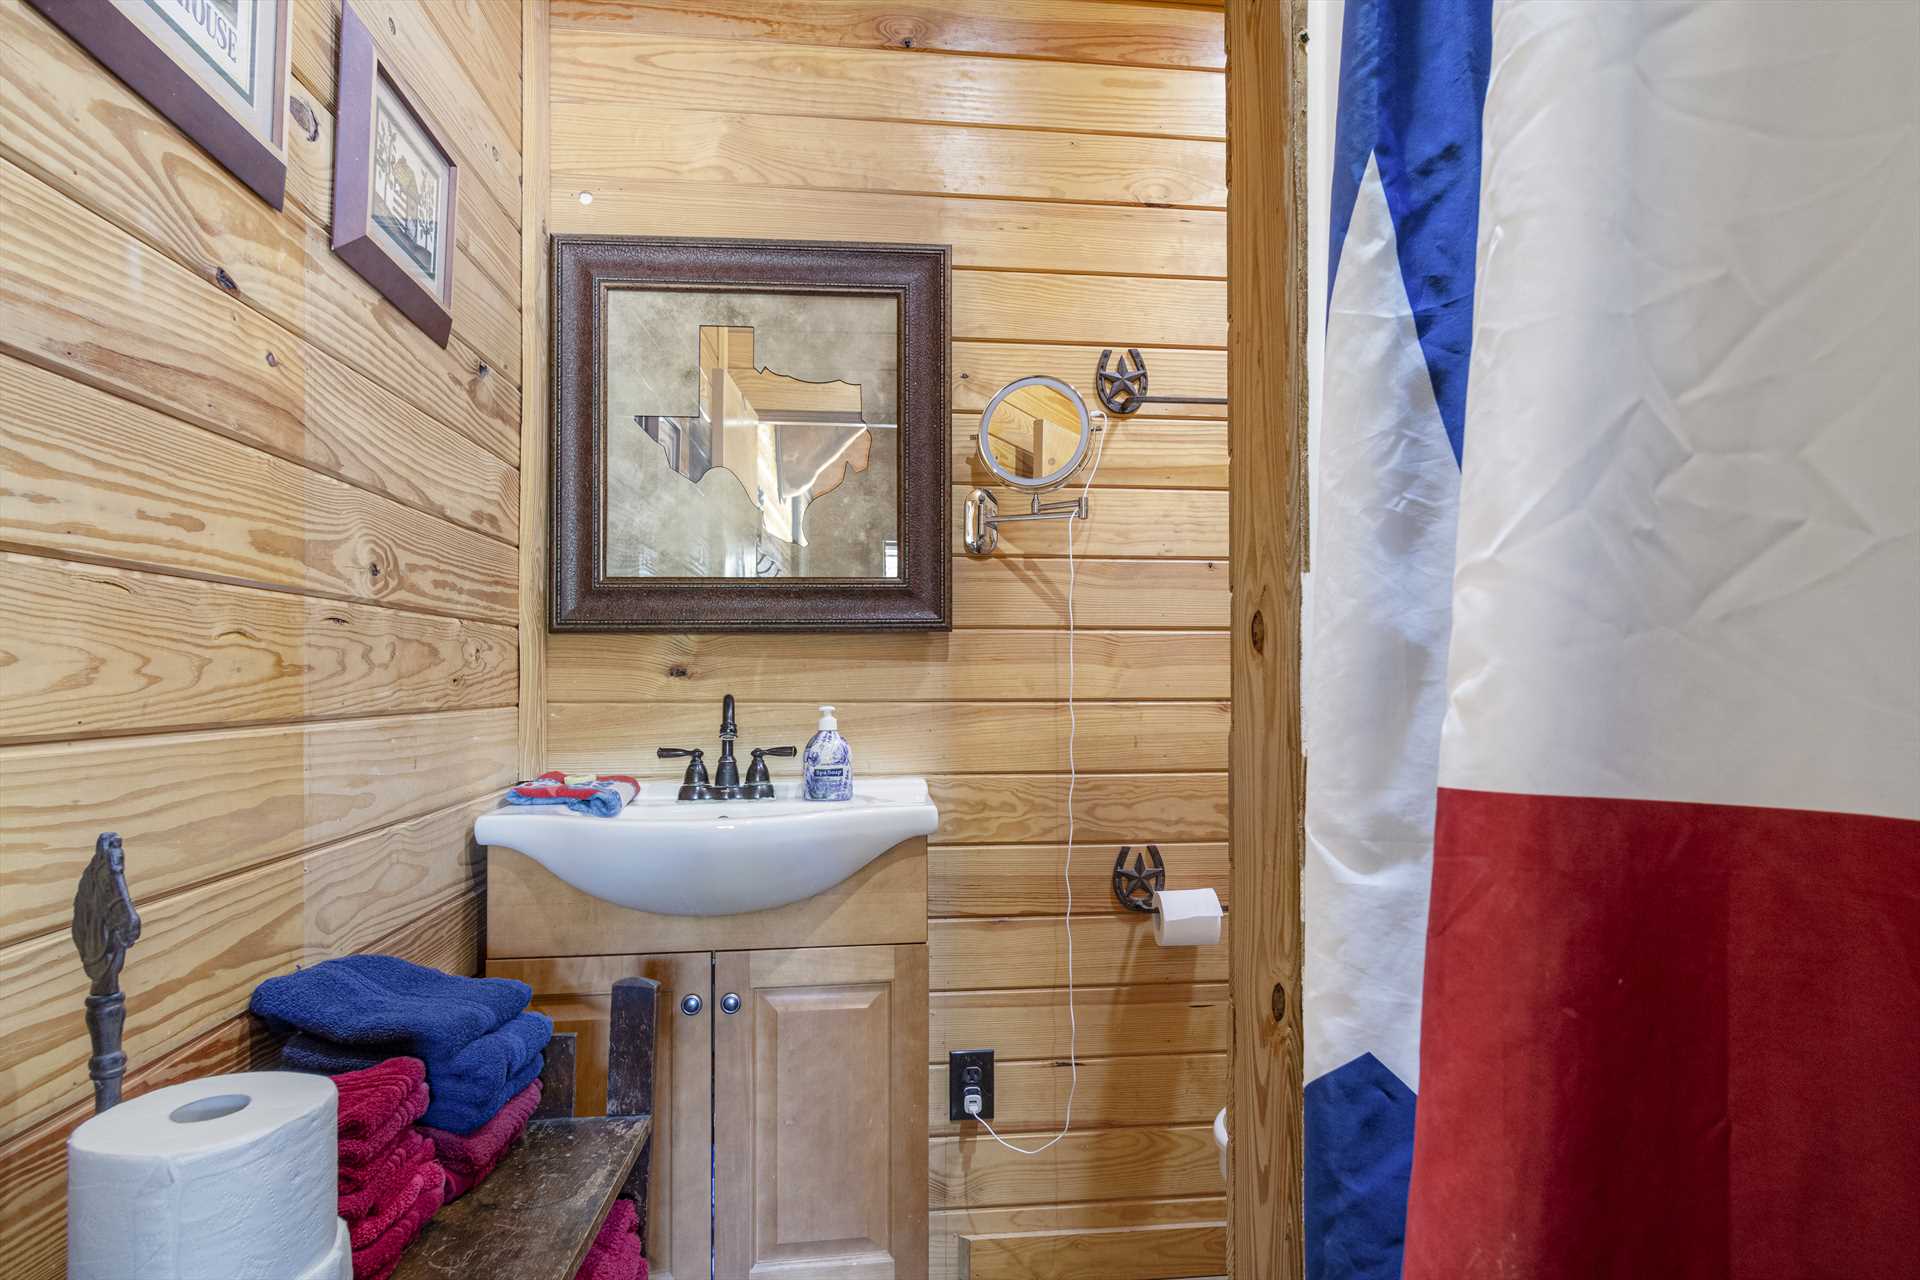                                                 The full bath at the Texan Cabin includes a step-in shower, clean linens, and a single vanity.